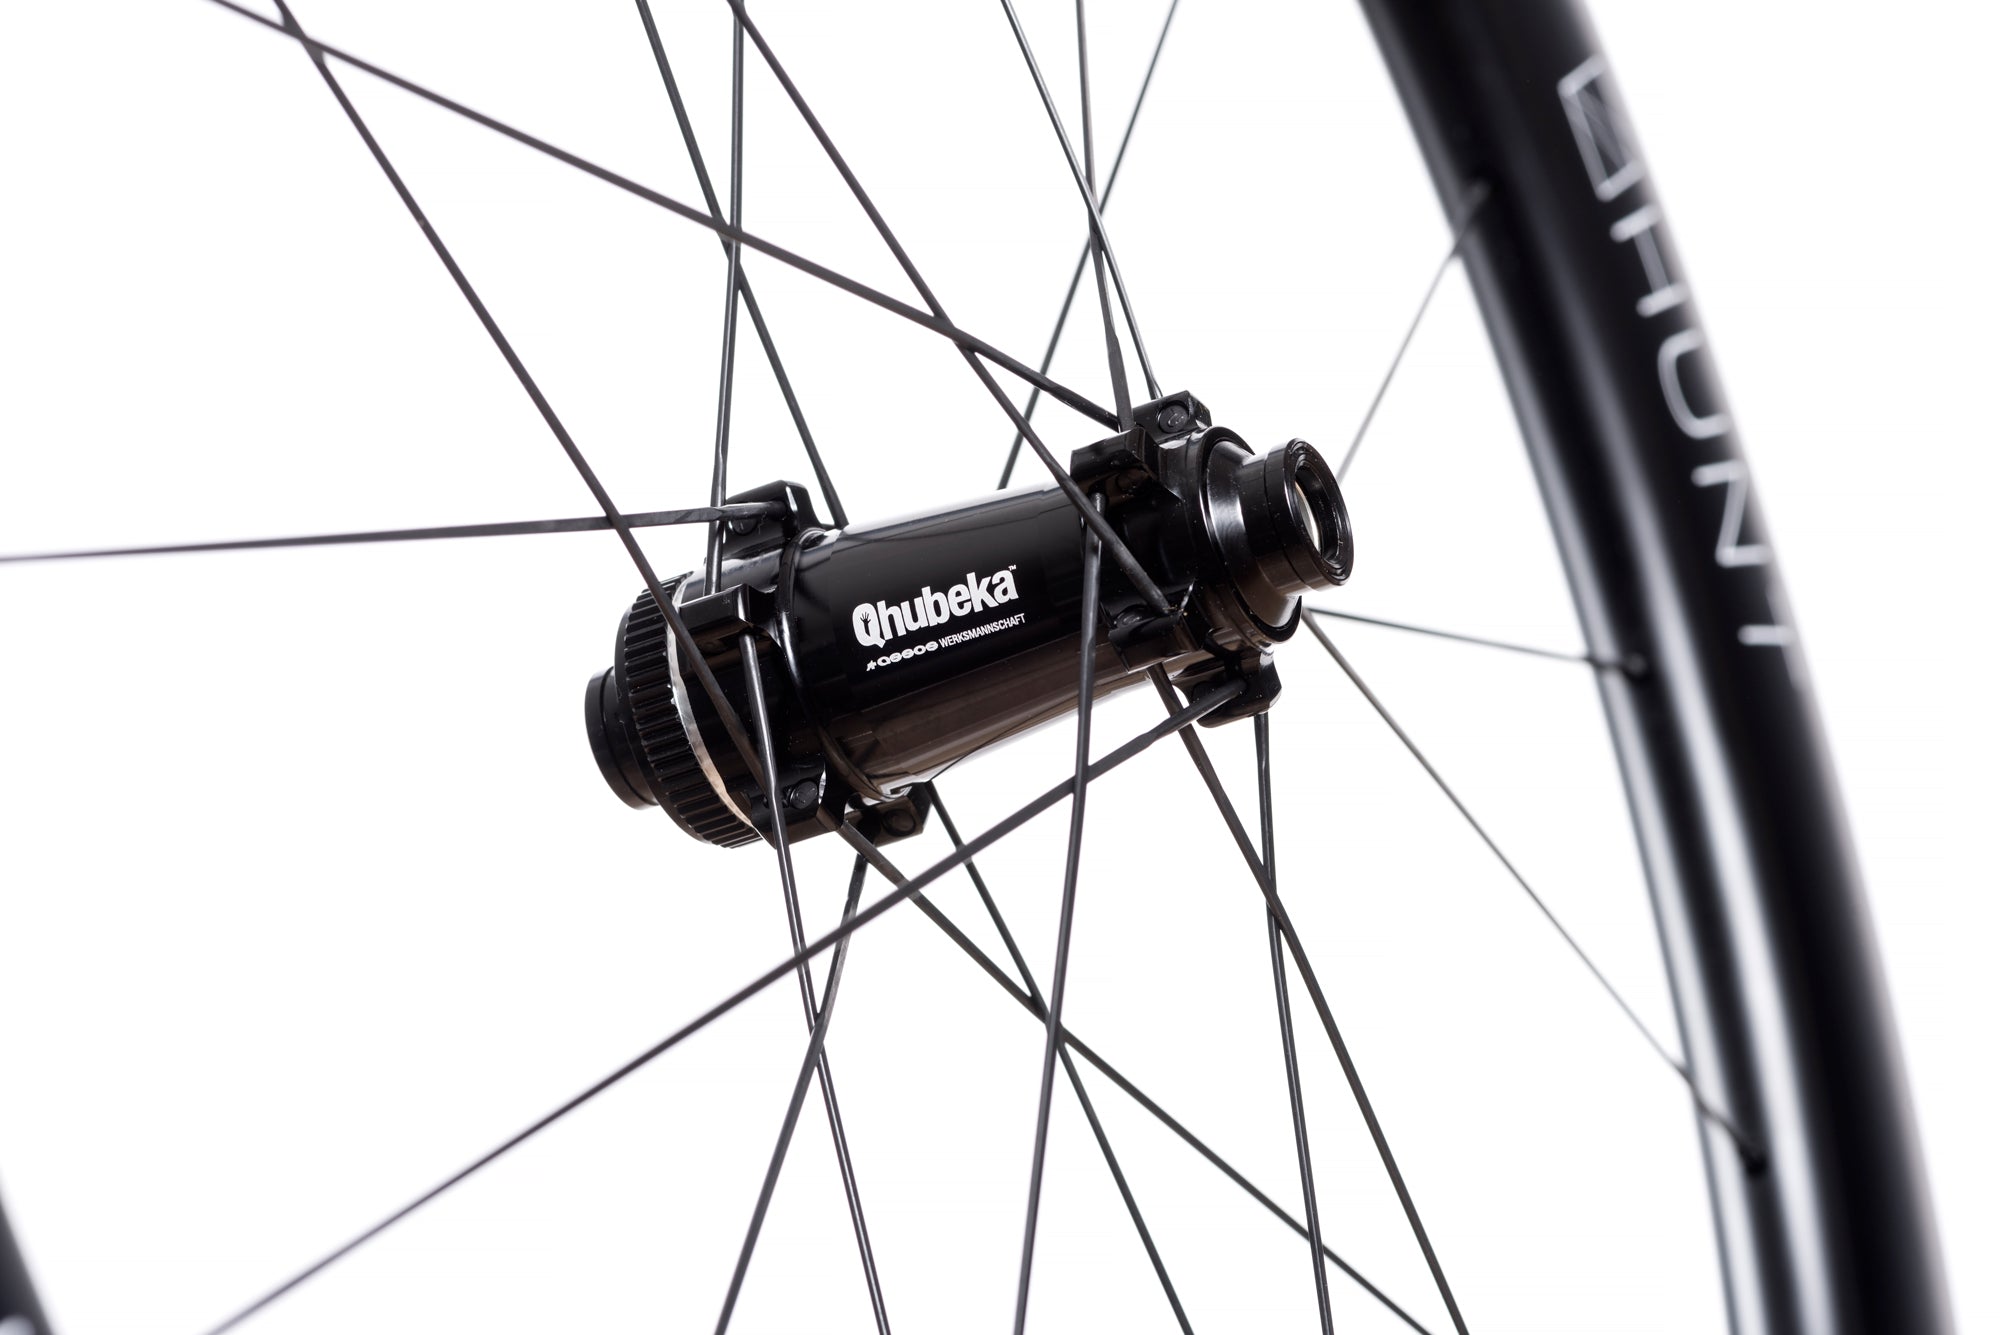 <h1>Sprint Hubs</h1><i>SPRINT hubs add strength and enhance power transfer, meaning all your force pushes you forwards. Large 15mm diameter hub axles for sprinting and out-of-saddle climbing responsiveness. Circular dropout interface steps add extra stiffness.</i>